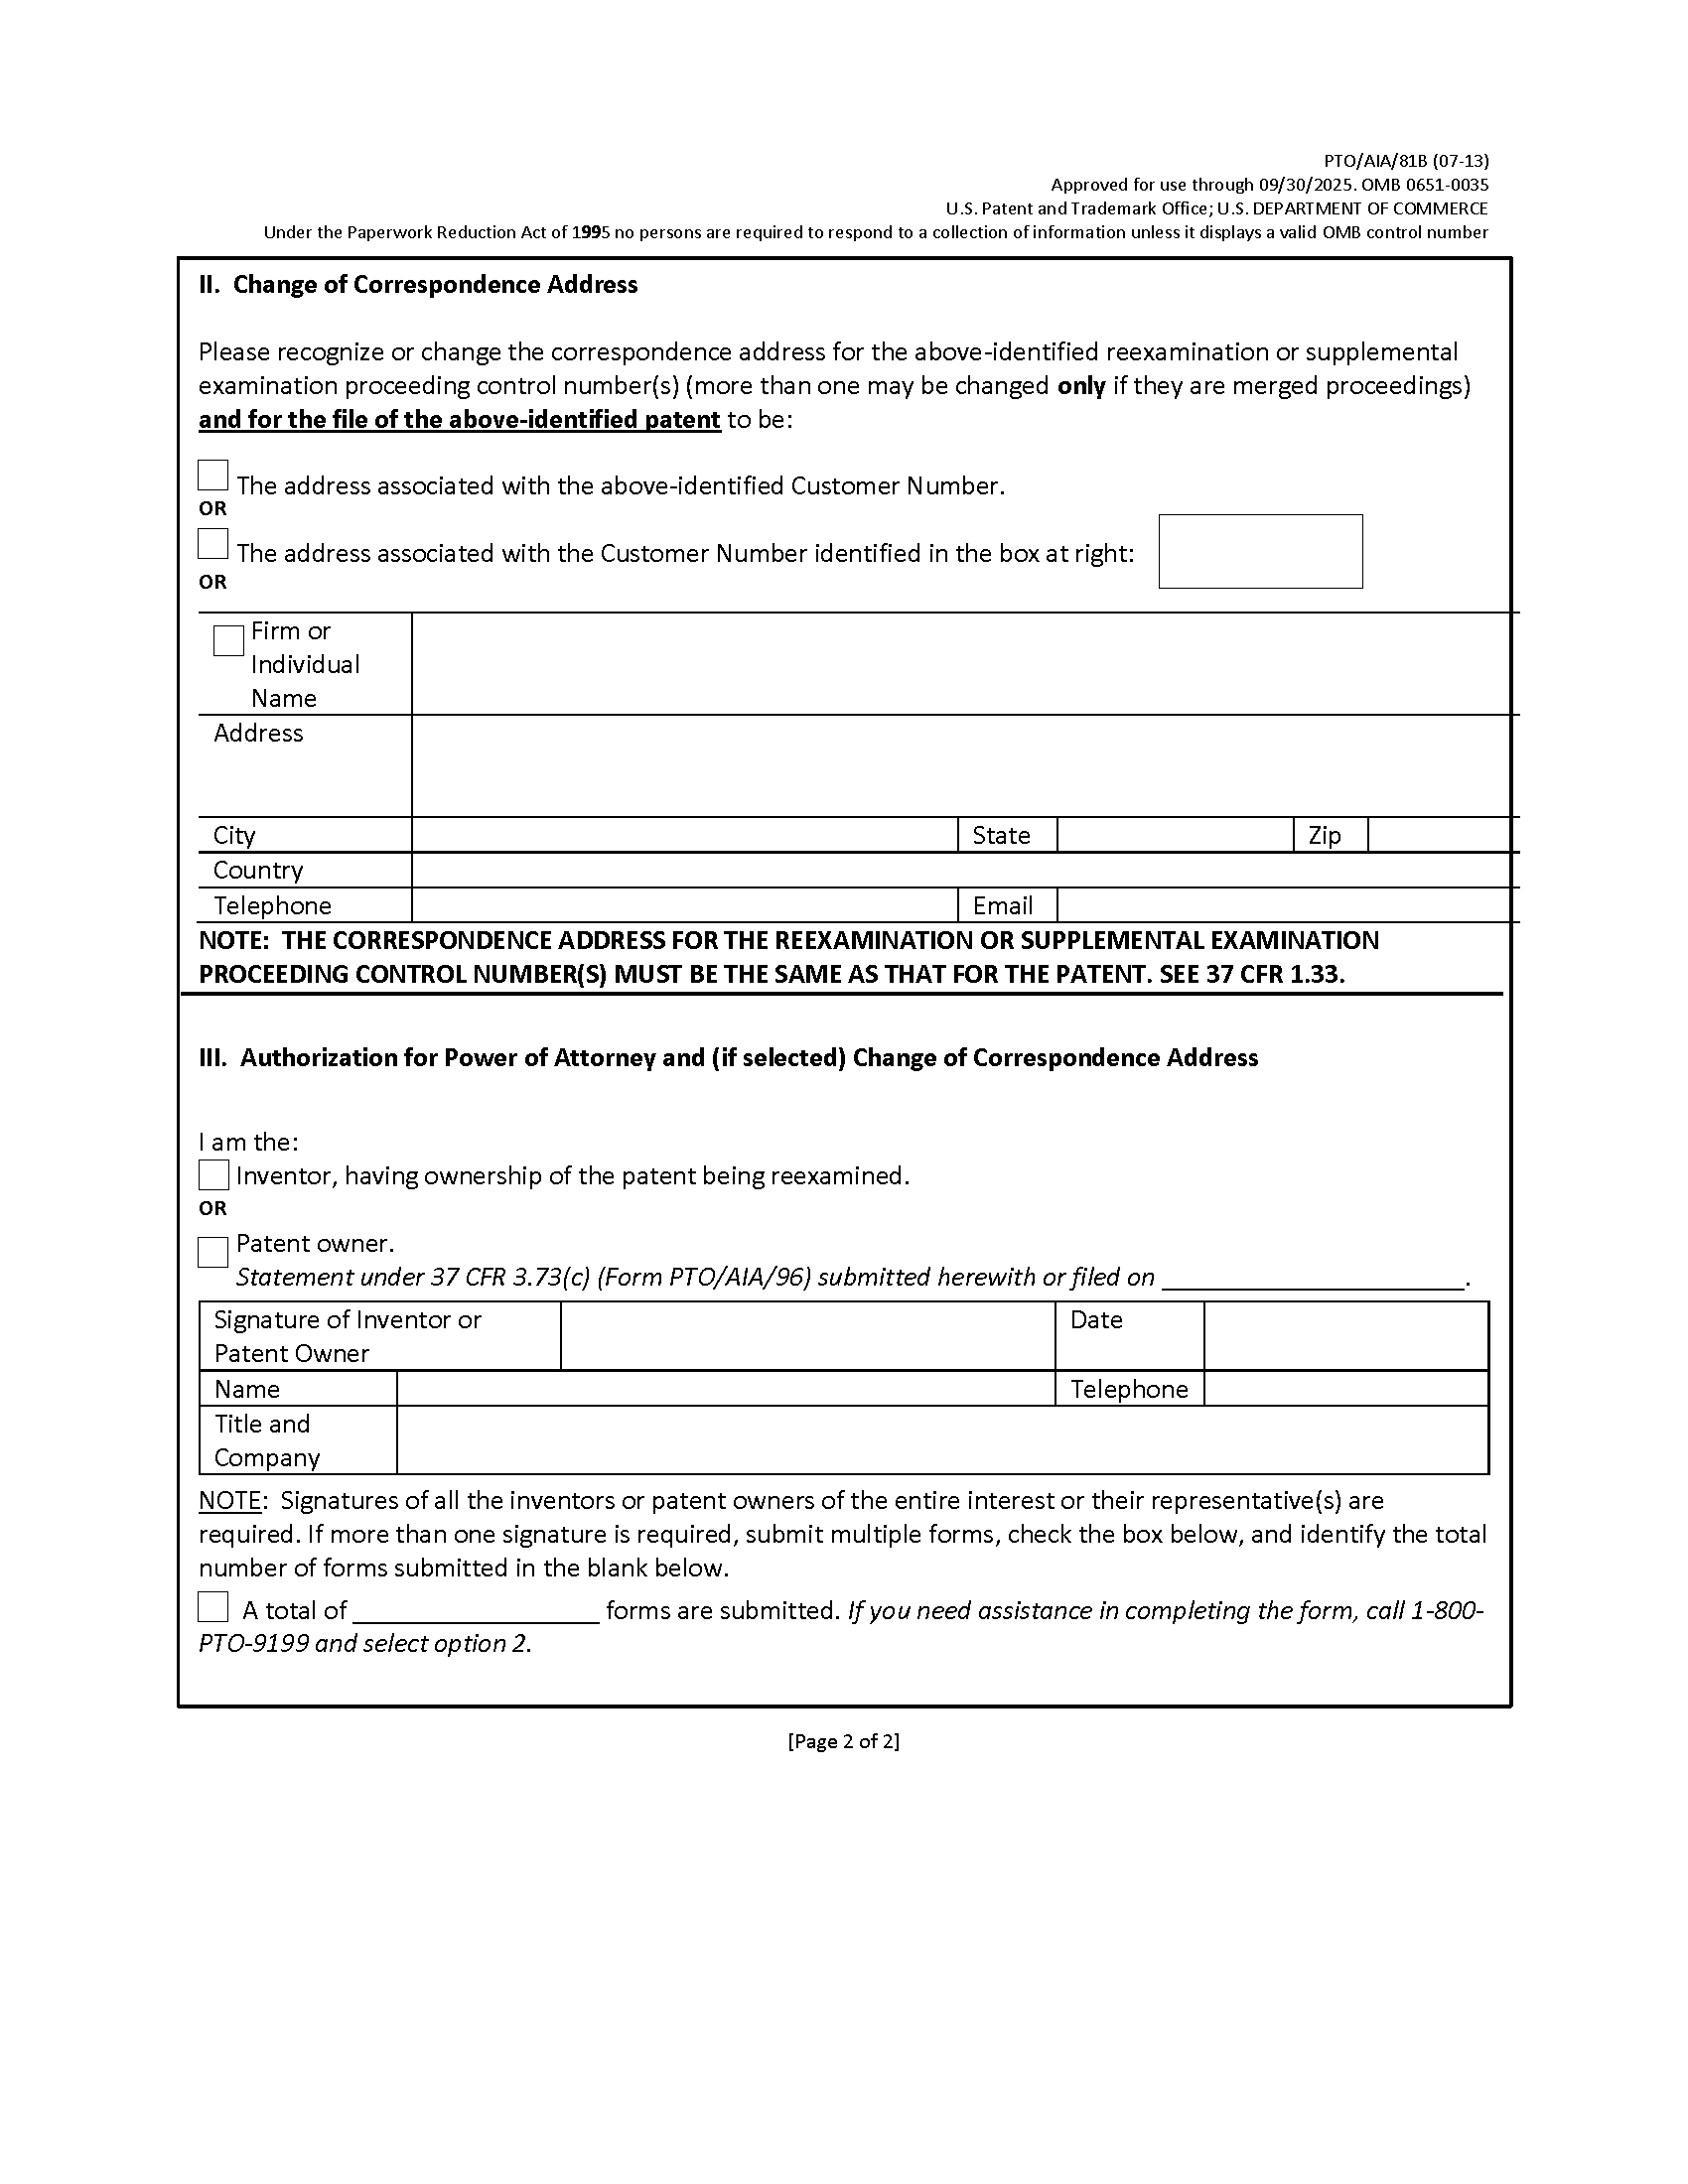 Page 2 of Form PTO/AIA/81B Reexamination or Supplemental Examination - Patent Owner Power of Attorney or Revocation of Power of Attorney With New Power of Attorney and Change of Correspondence Address